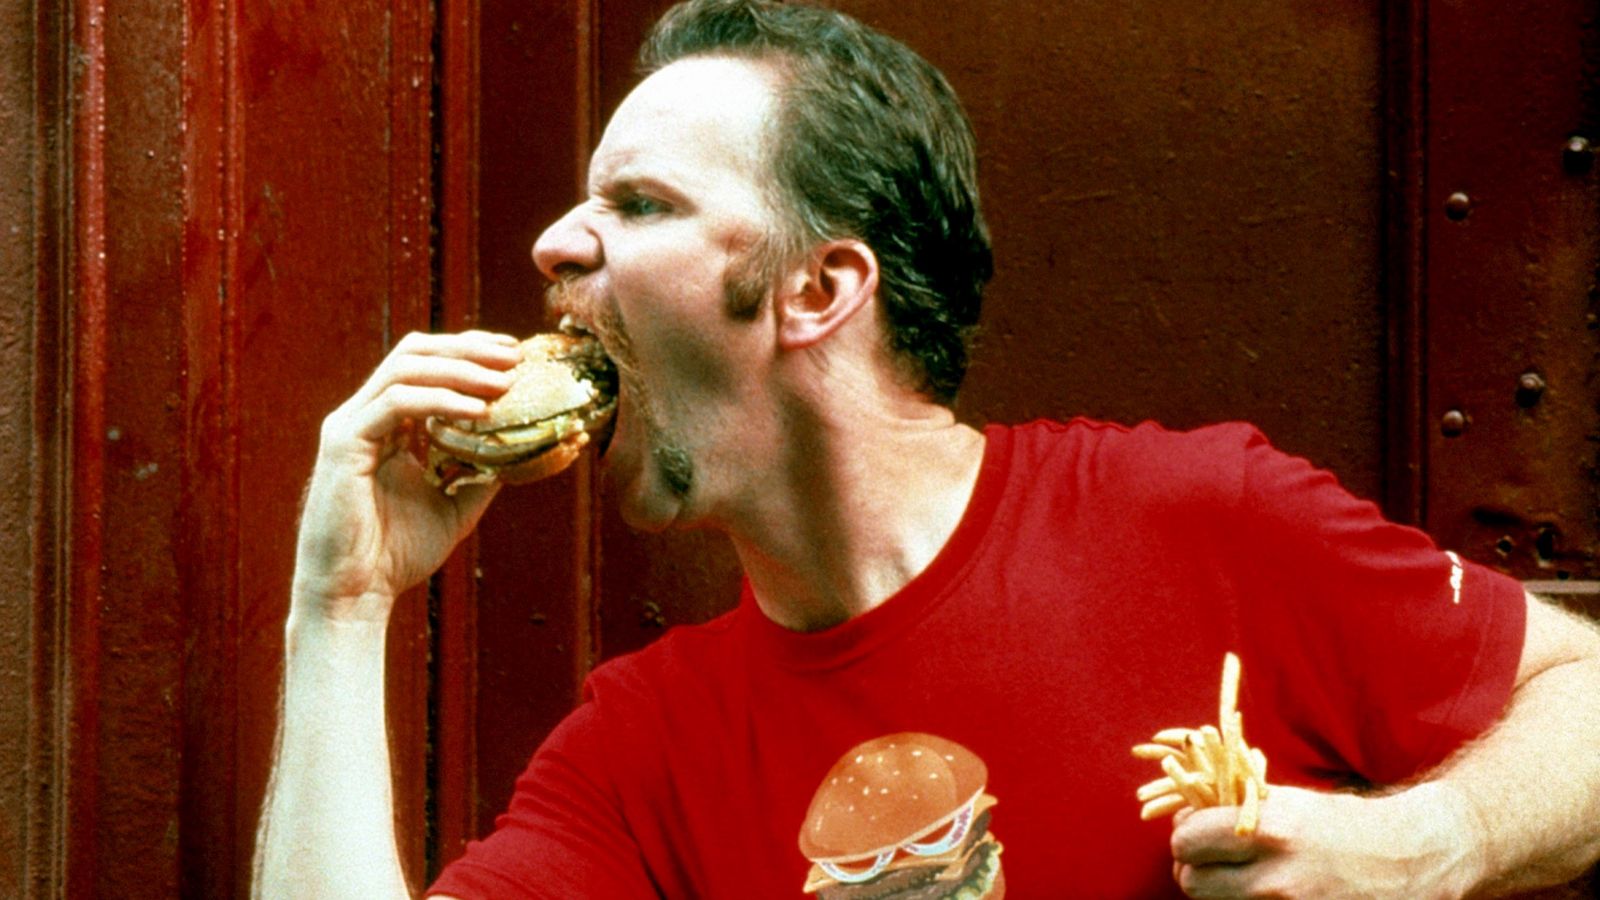 Morgan Spurlock: Super Size Me documentary maker, who ate only McDonald's for a month, dies aged 53